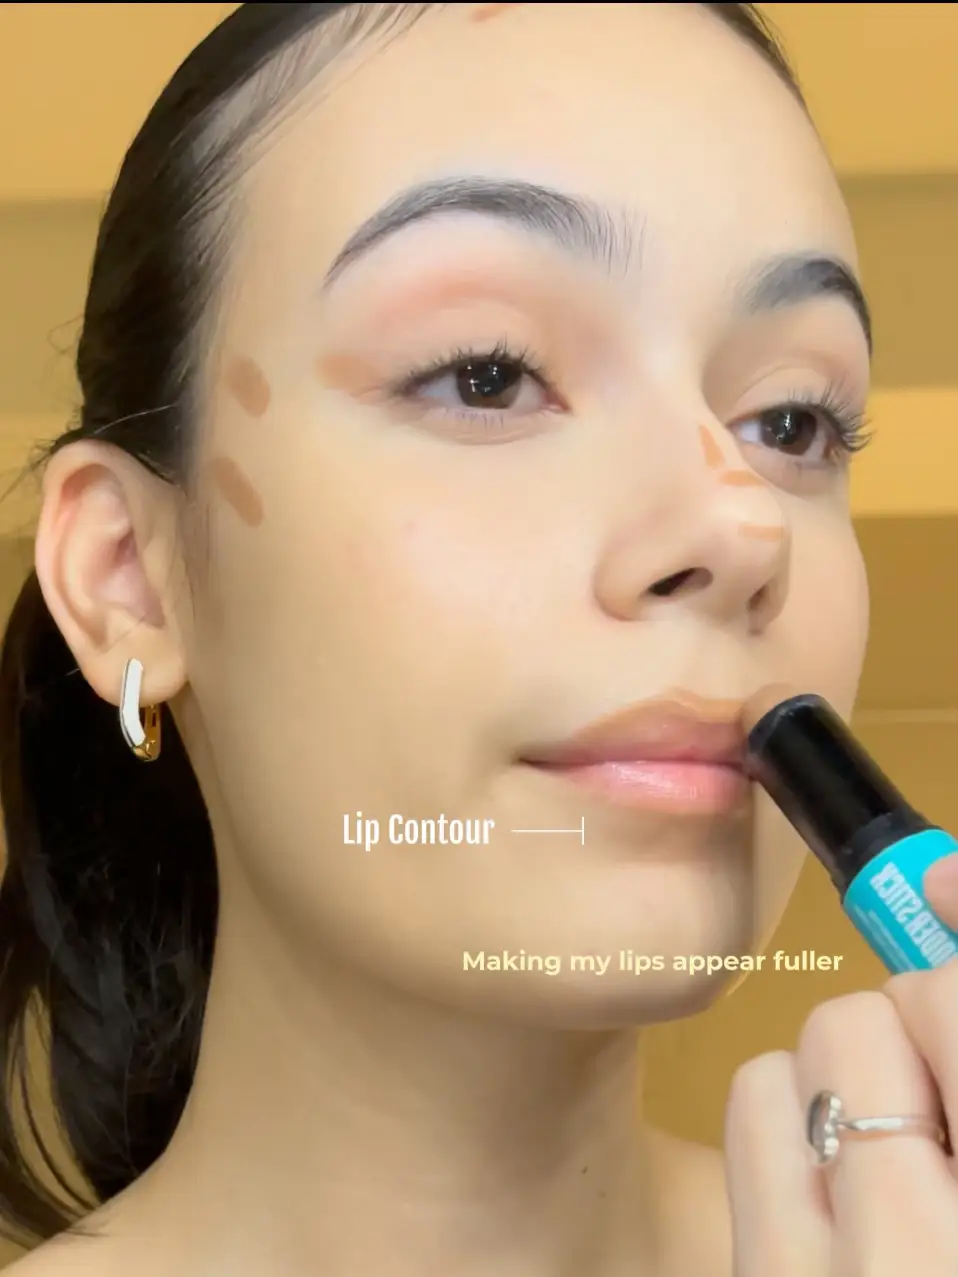 Lip Contouring 101: How To Define Your Lips With Lip Contour - MAKE Beauty